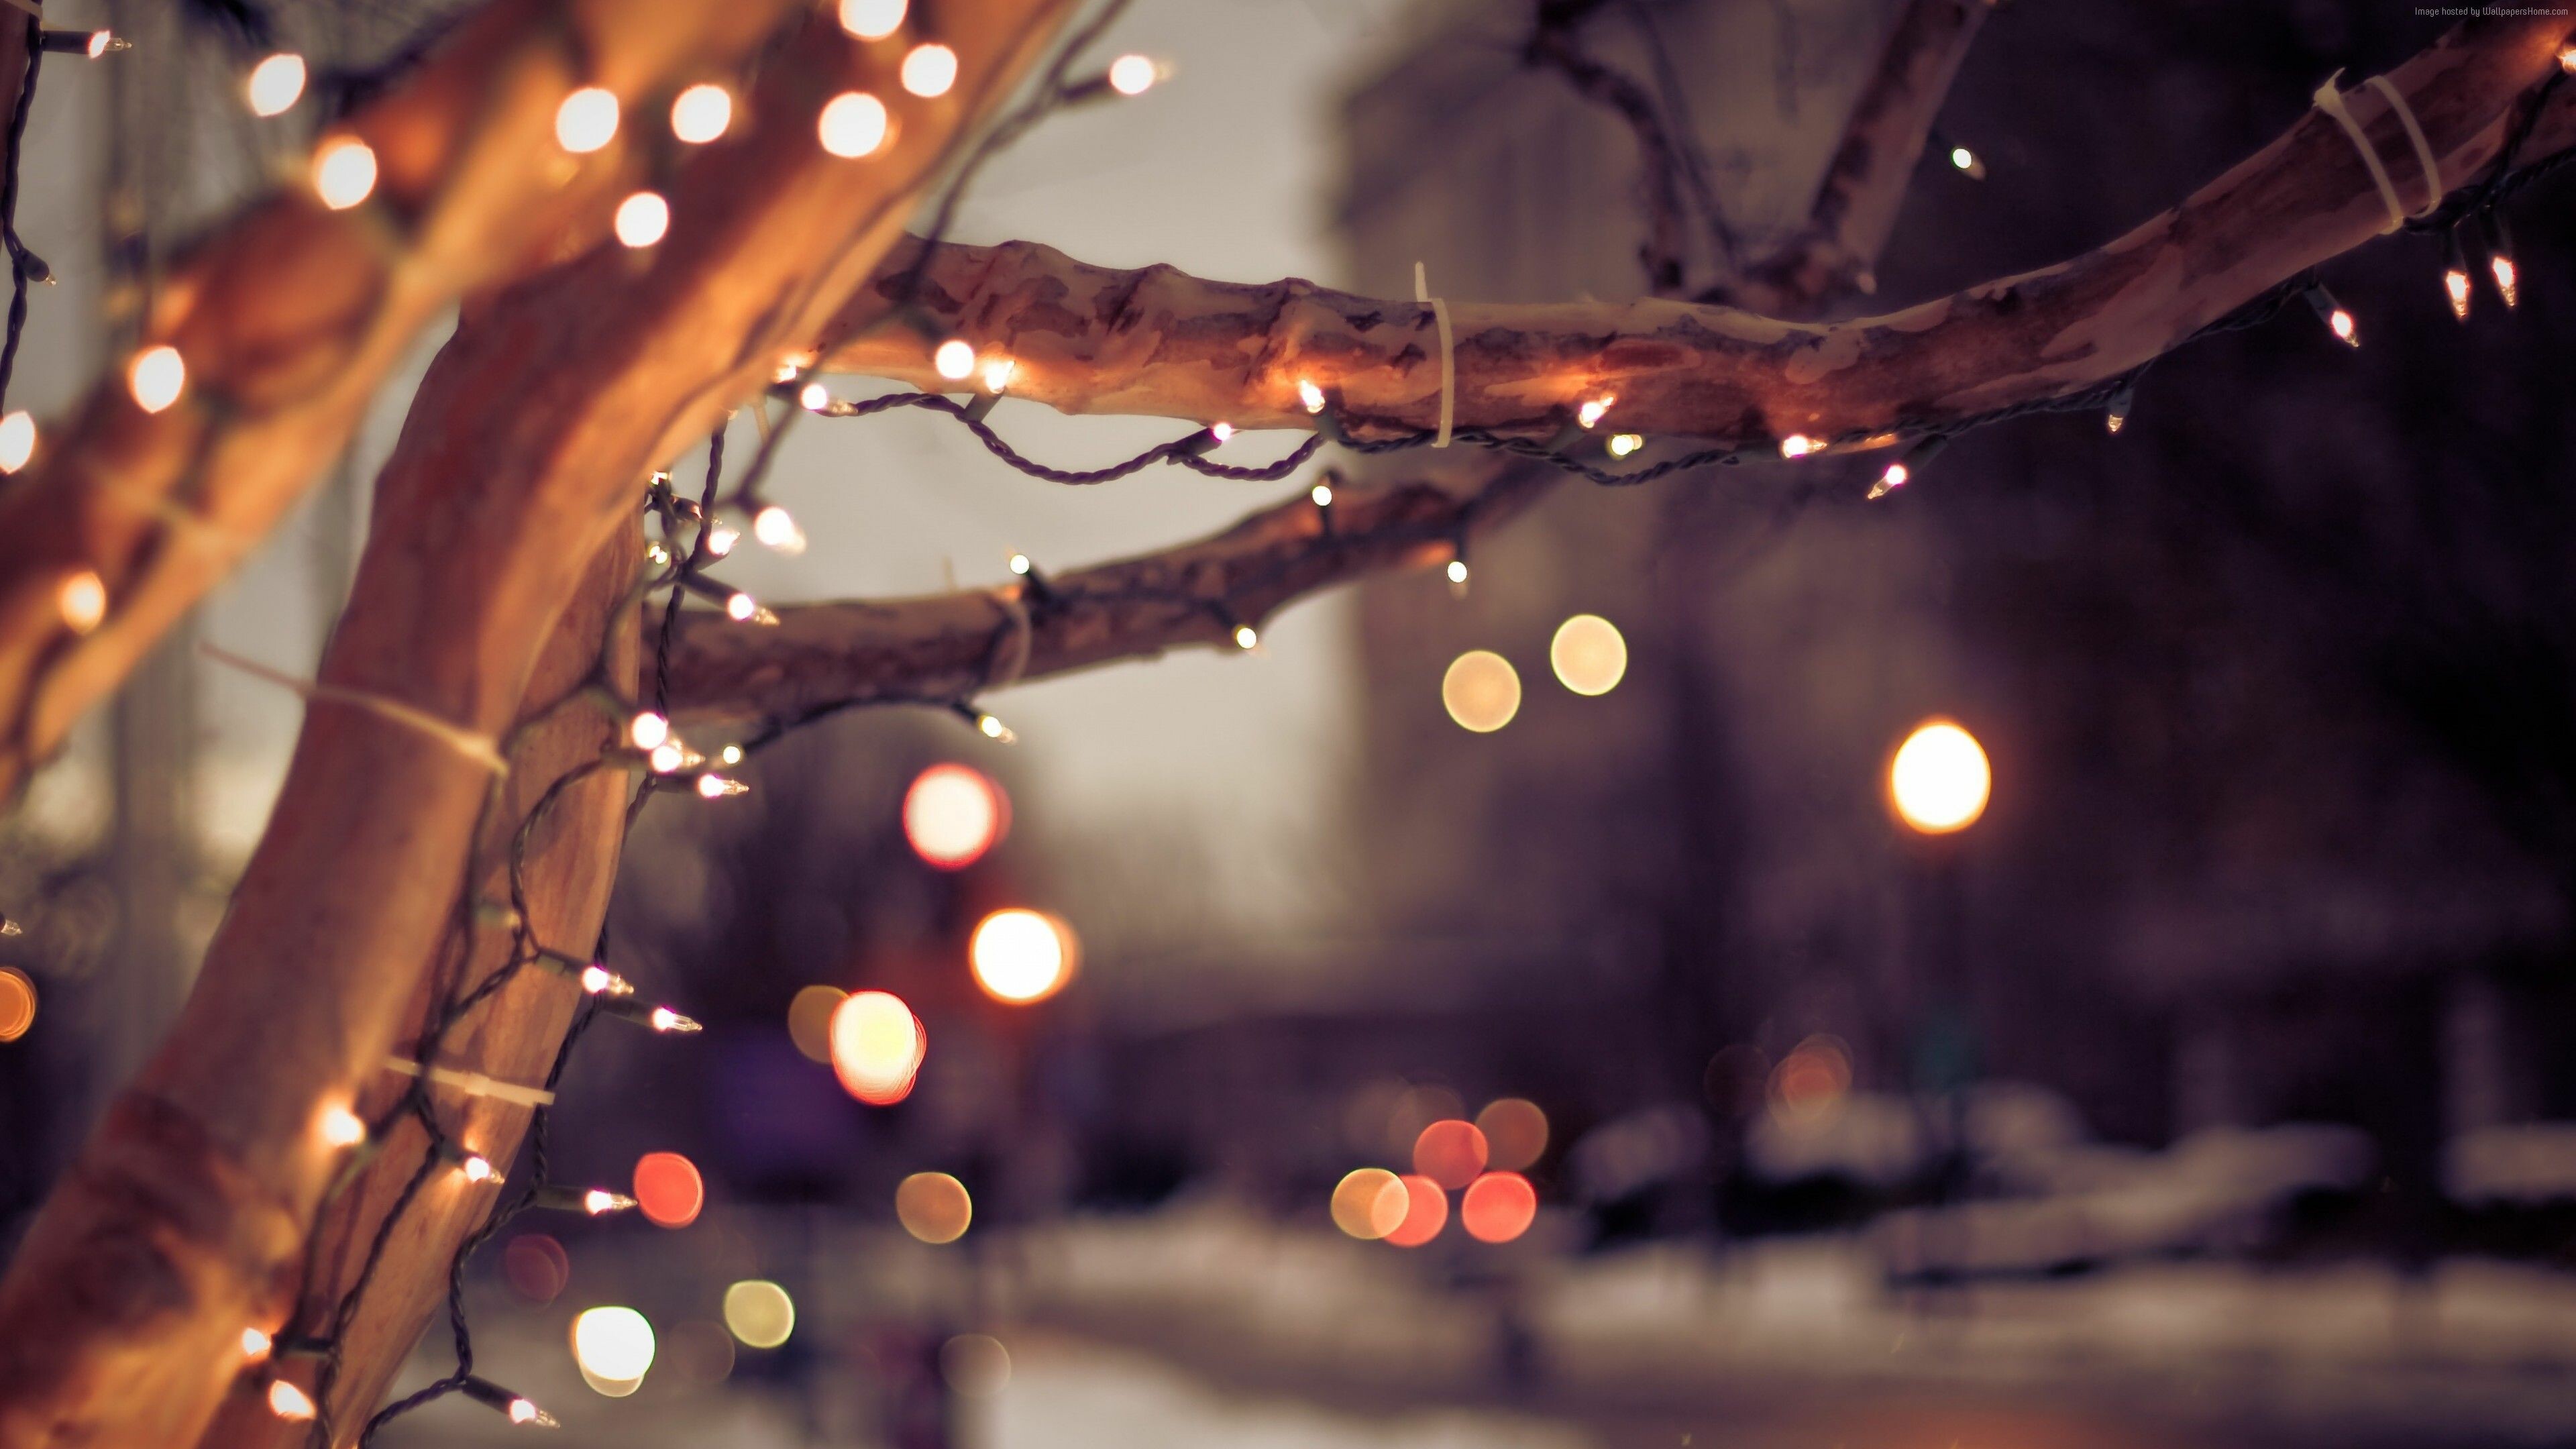 Fairy Lights: Often used for decoration in celebration of Christmas or New Year. 3840x2160 4K Wallpaper.